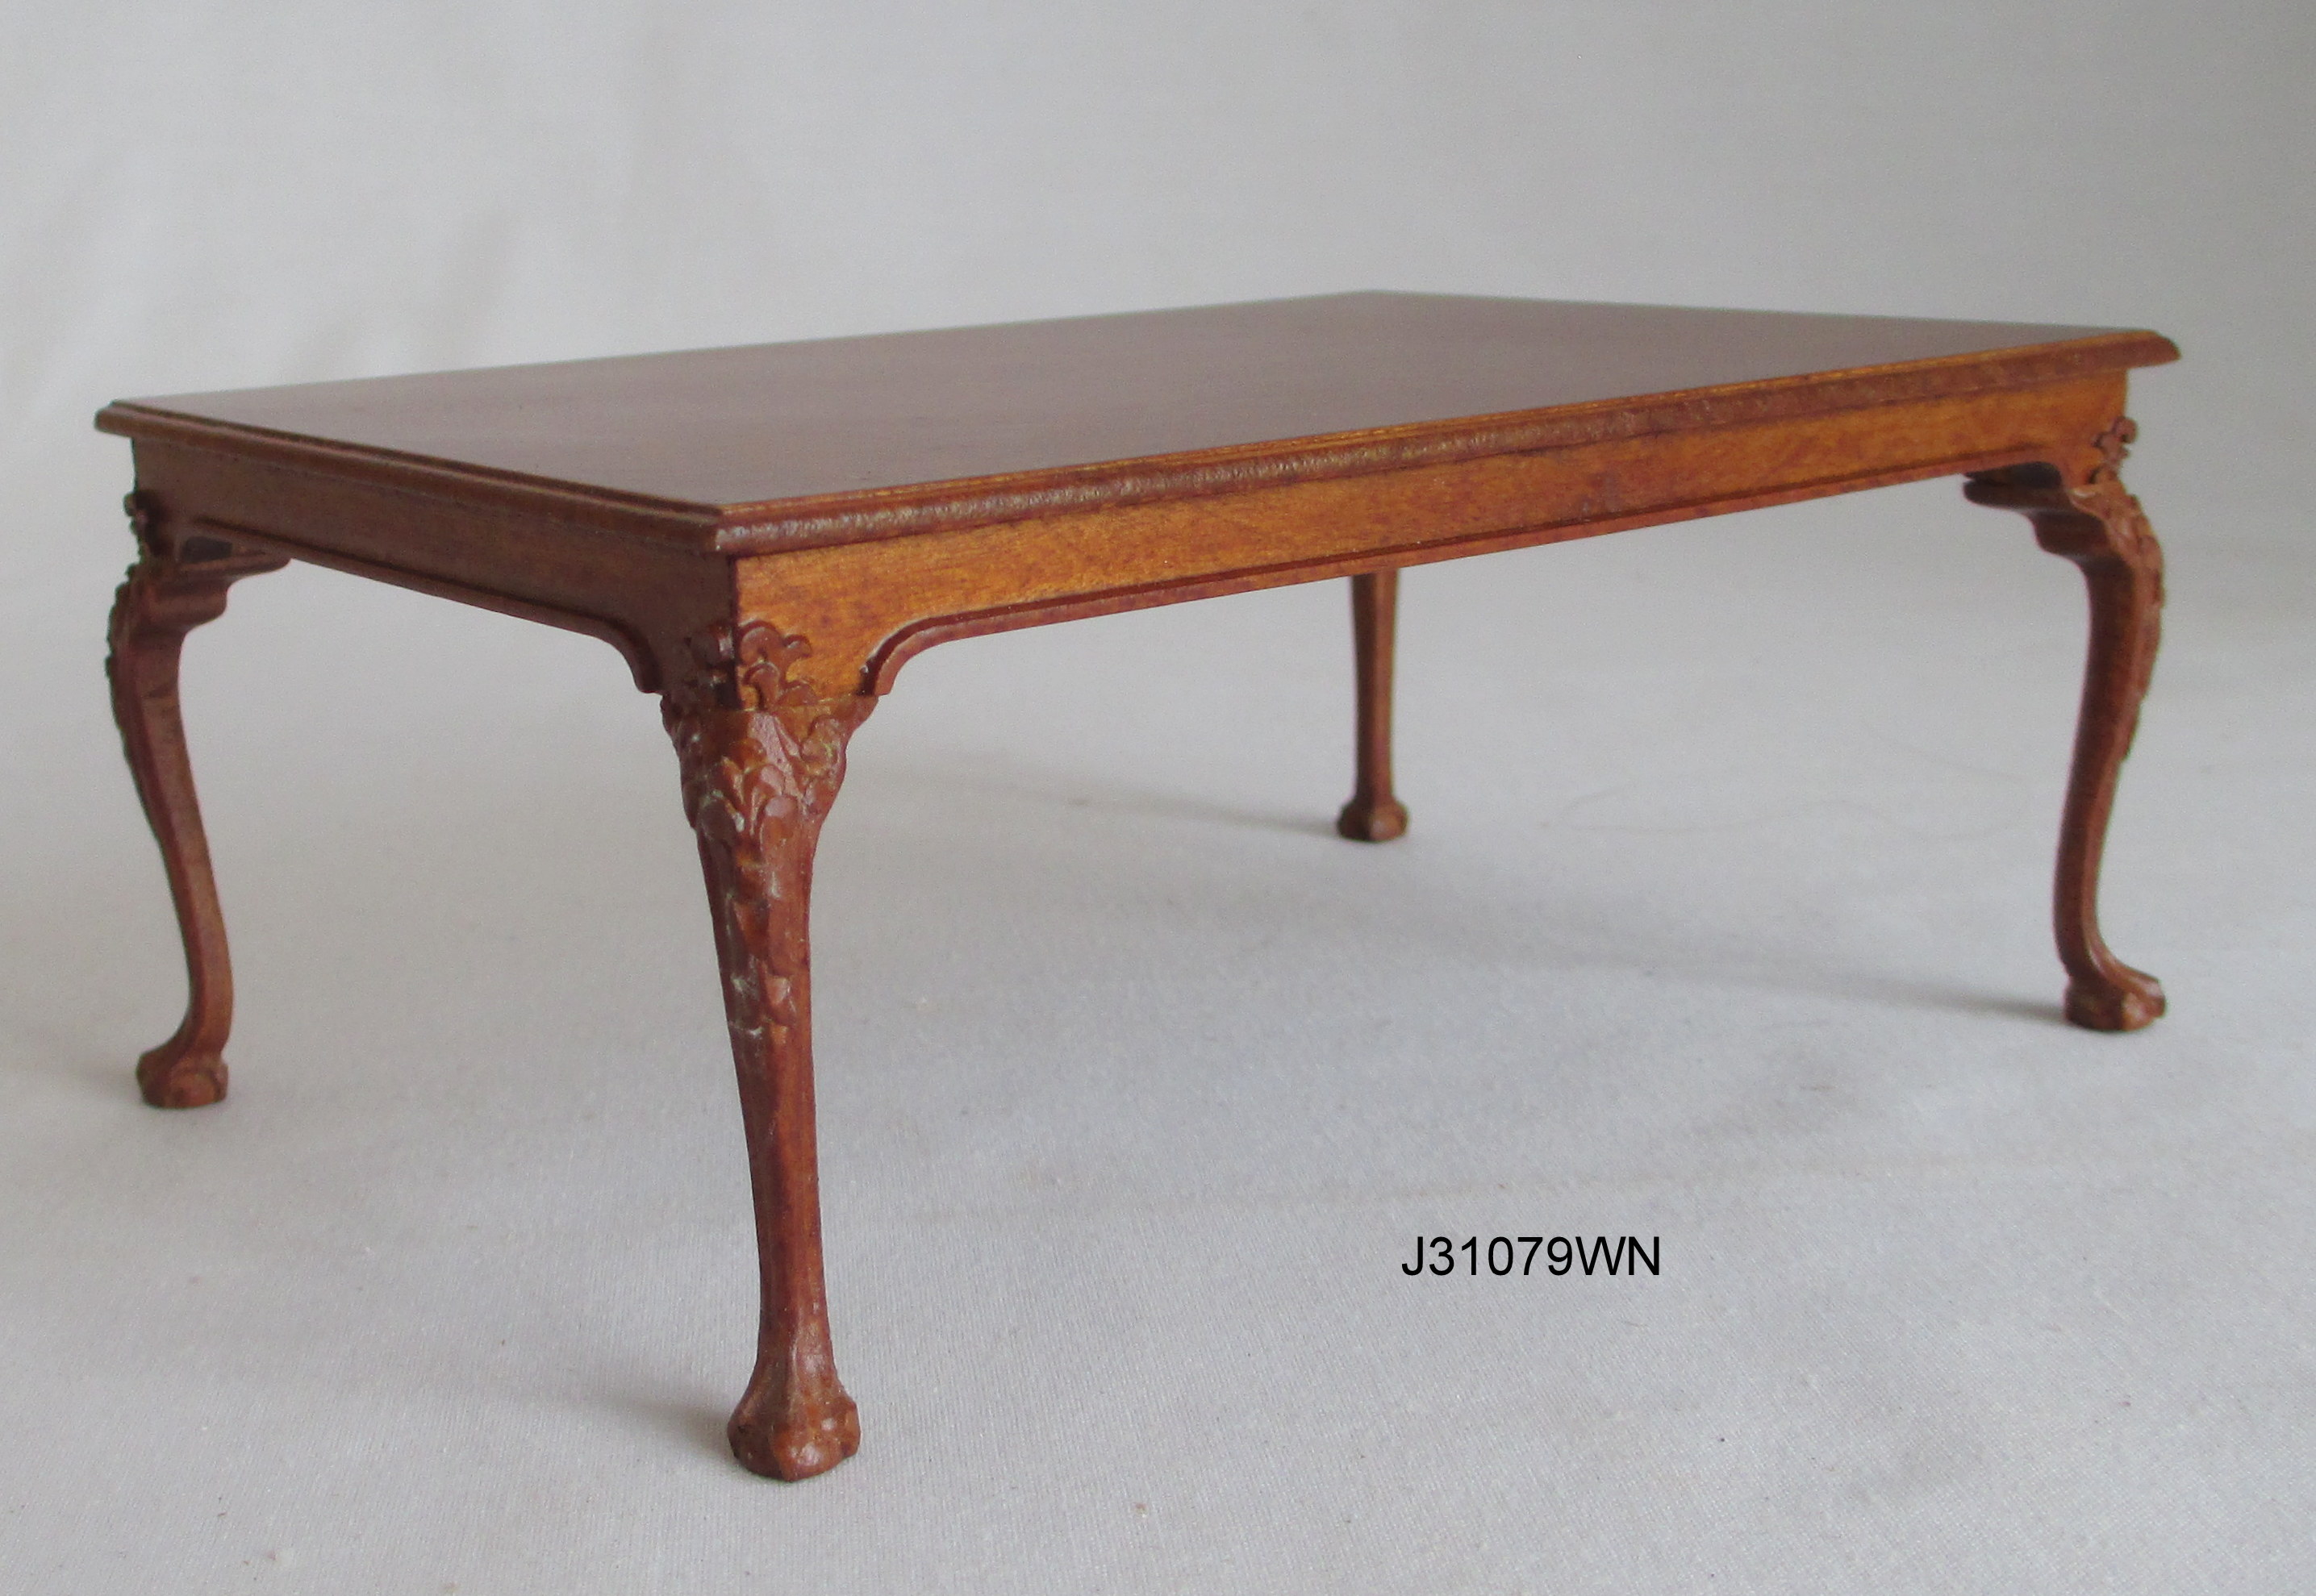 Queen Anne Dining Table period 1725- 1755 -Walnut